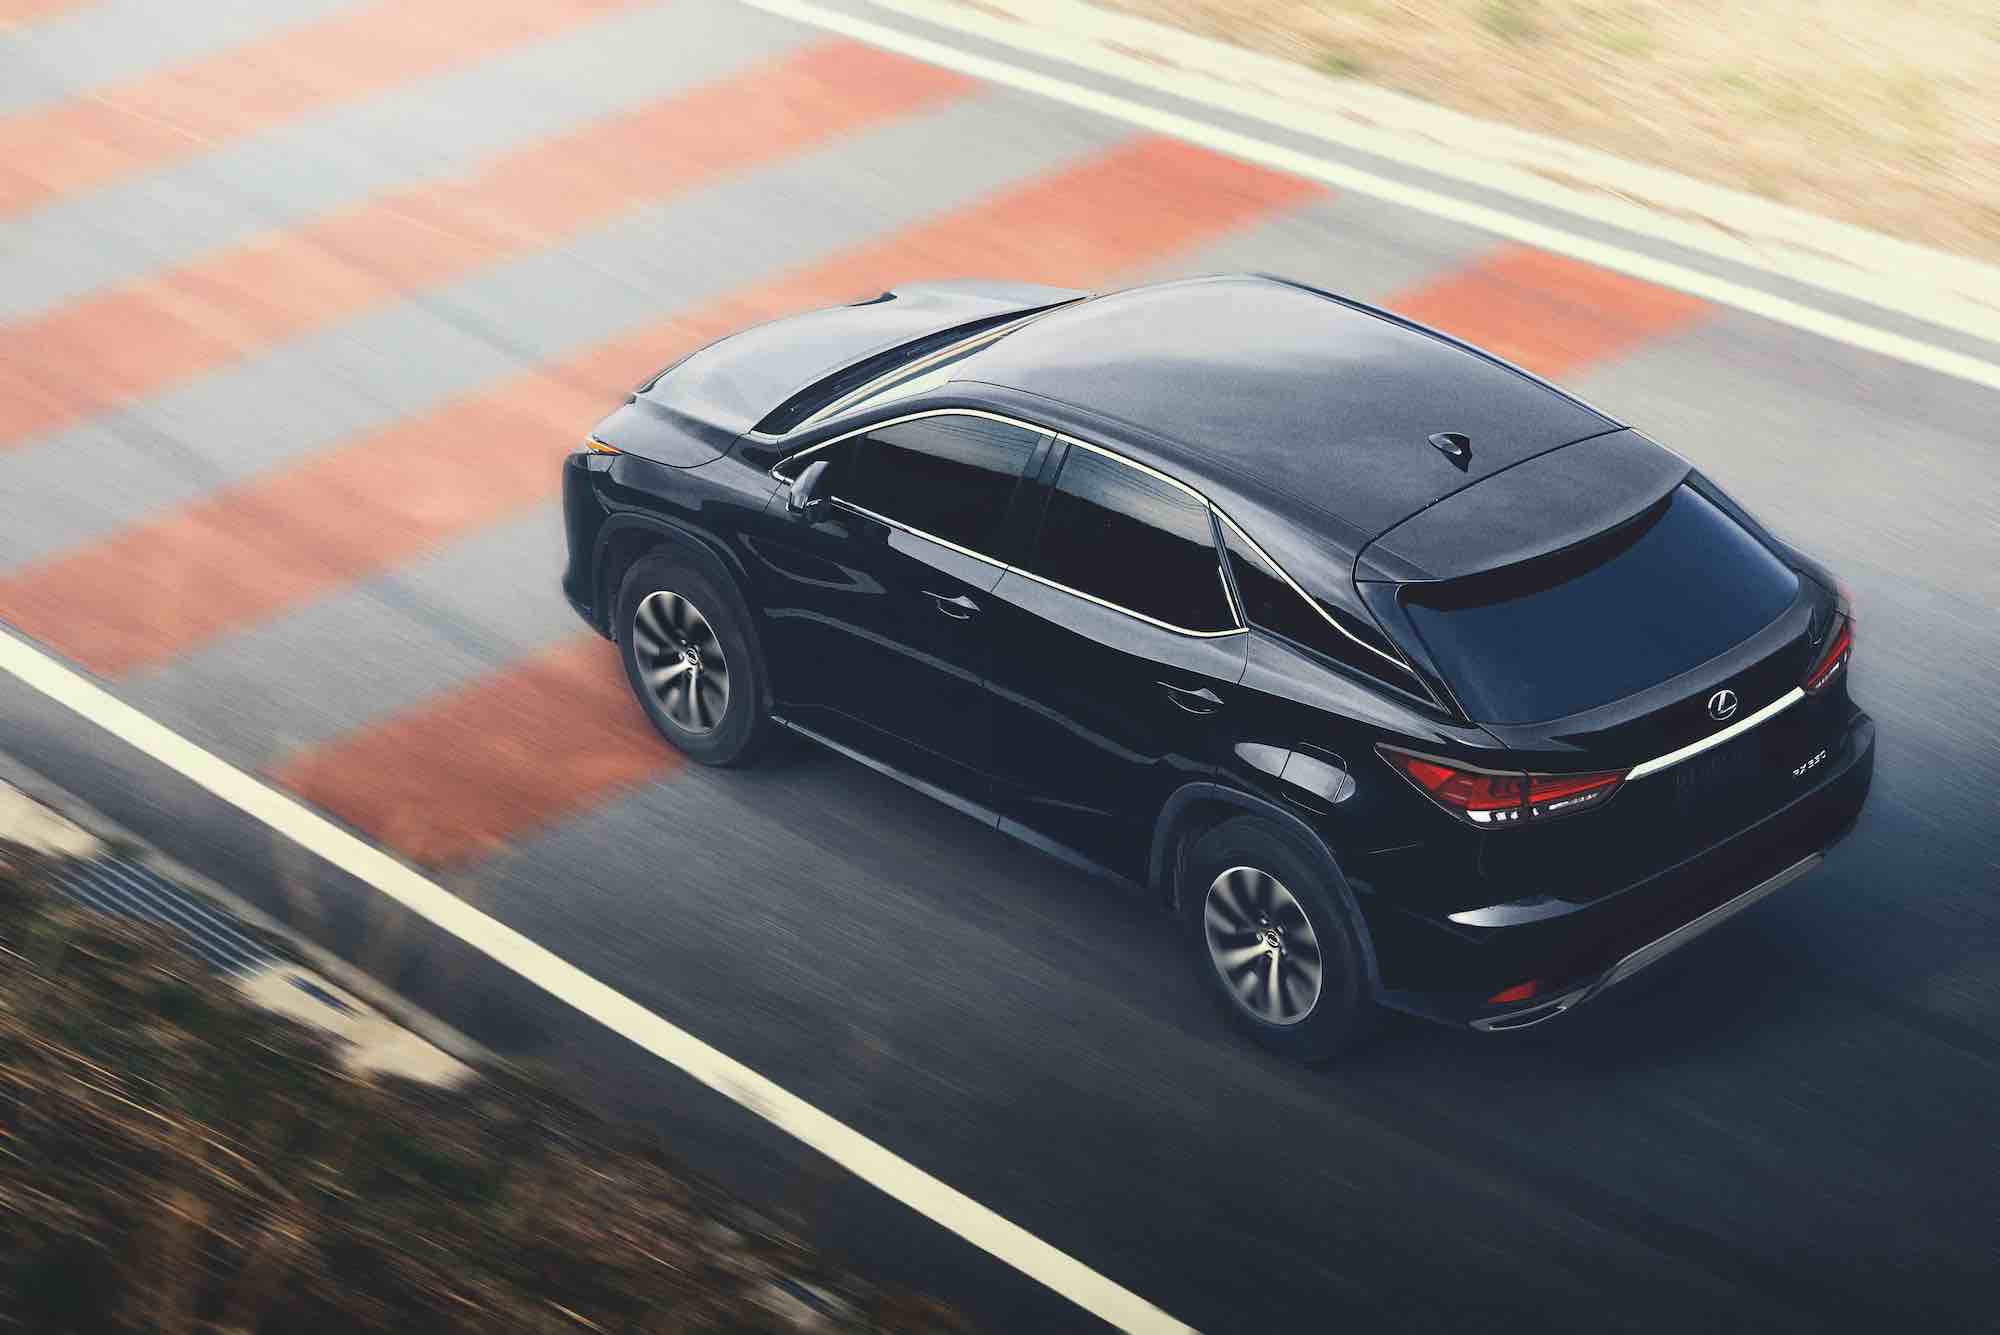 A black 2021 Lexus RX350 travels on a paved strip painted with red lines